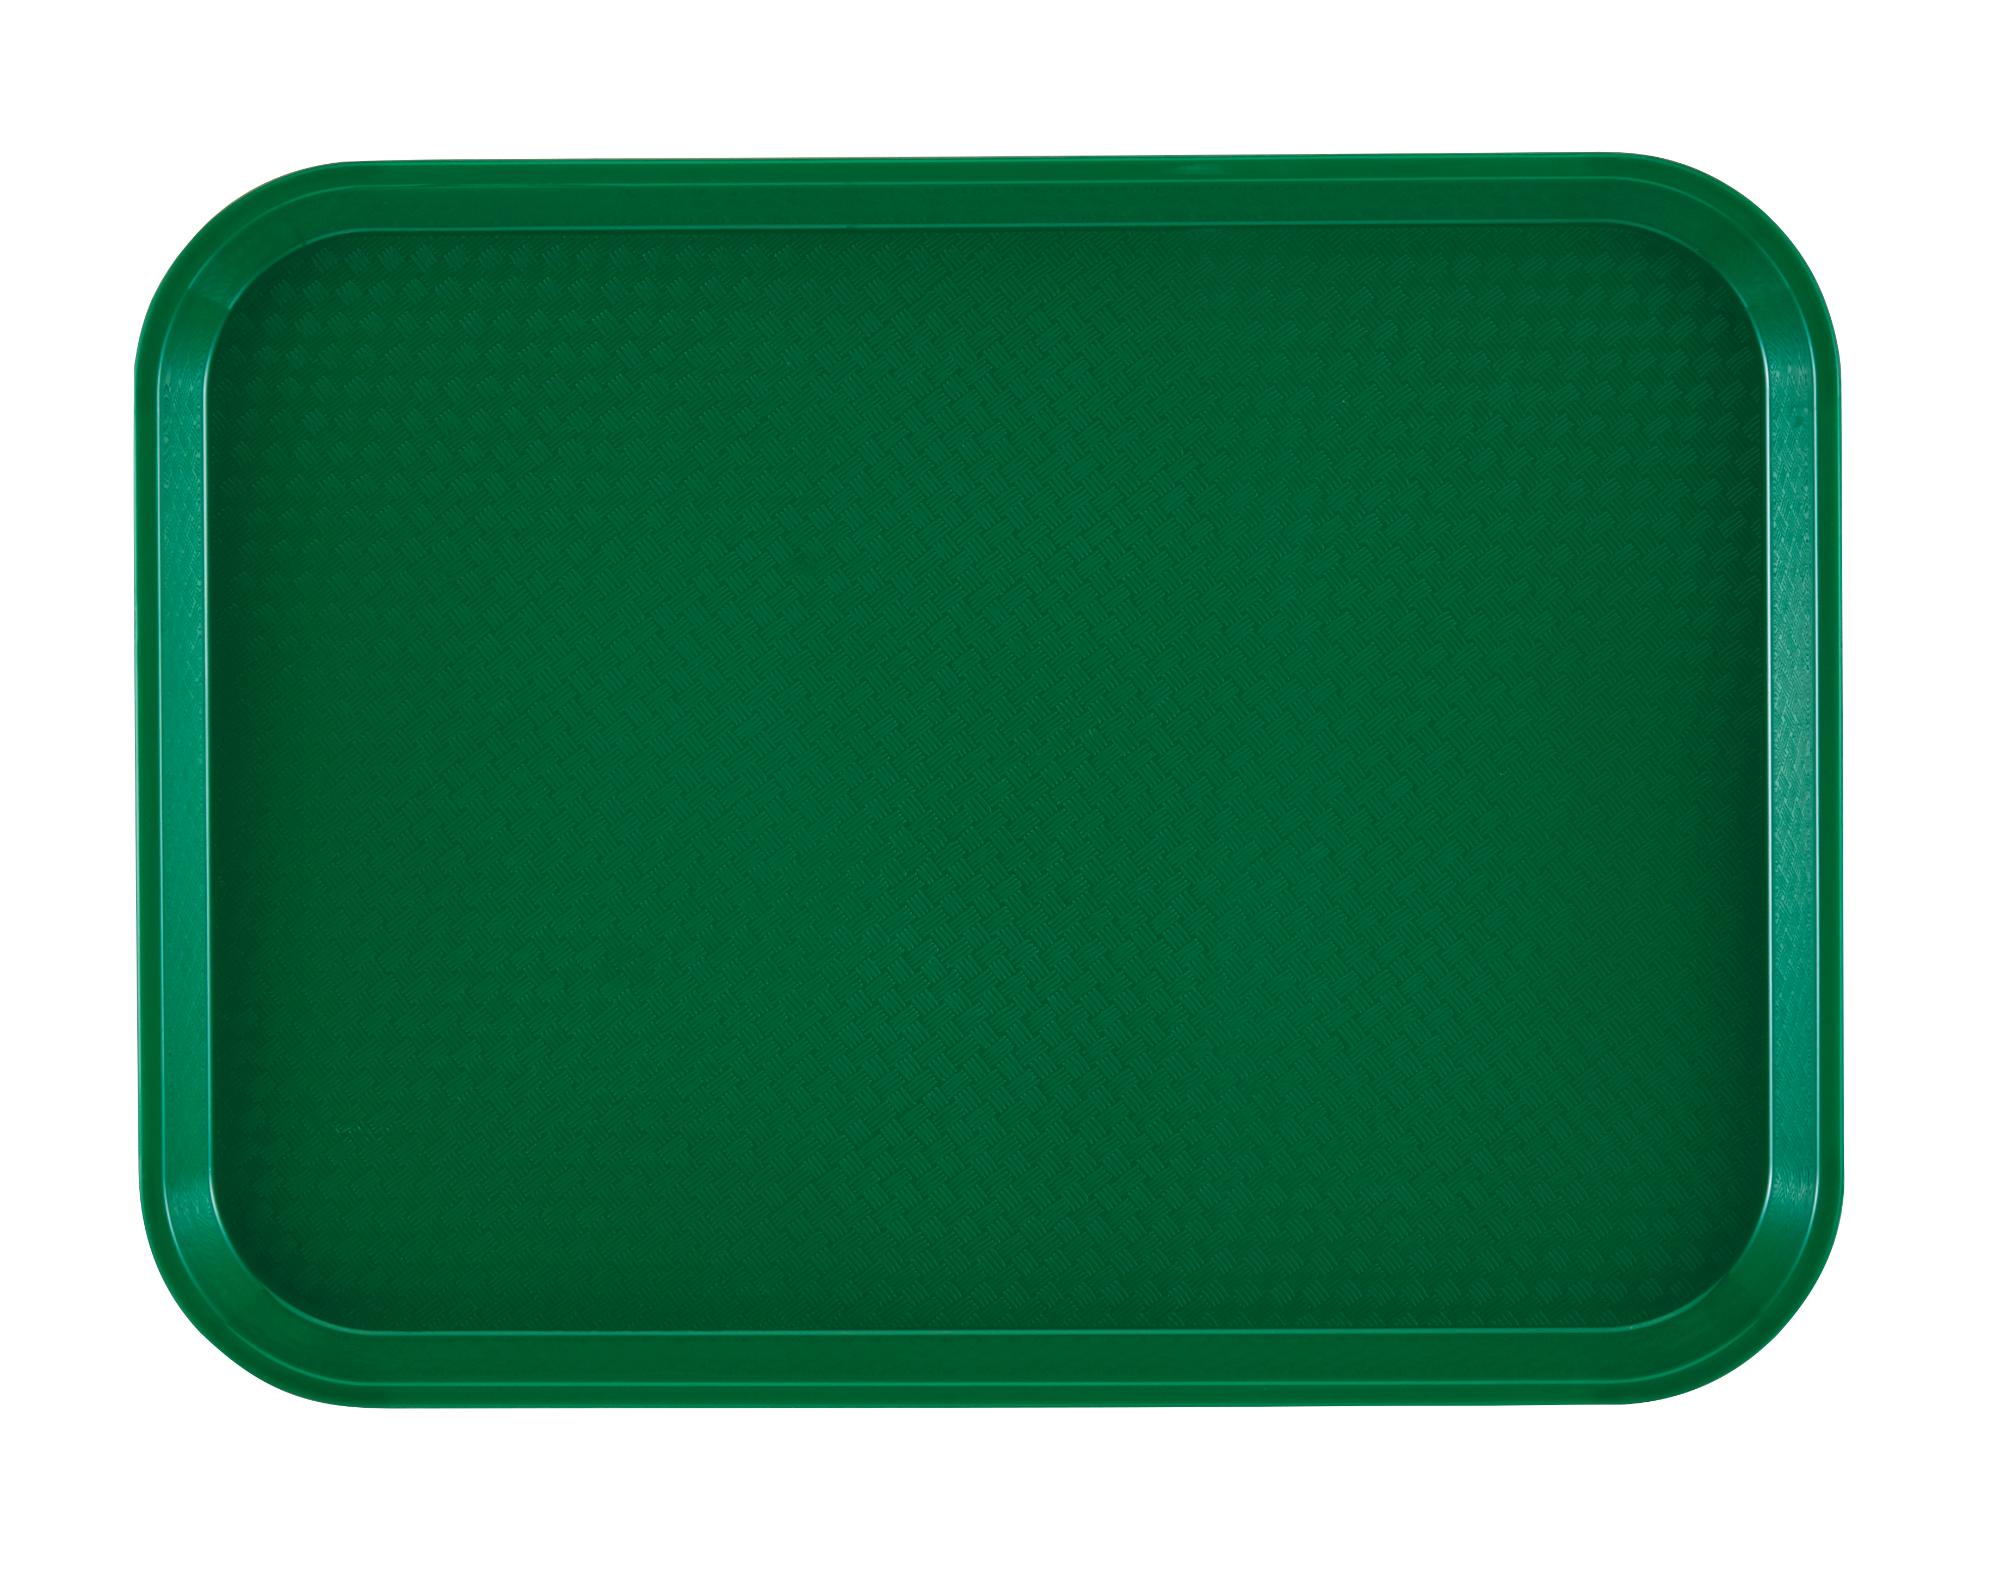 Fast Food polypropylene tray, textured surface, green, 355x457 mm